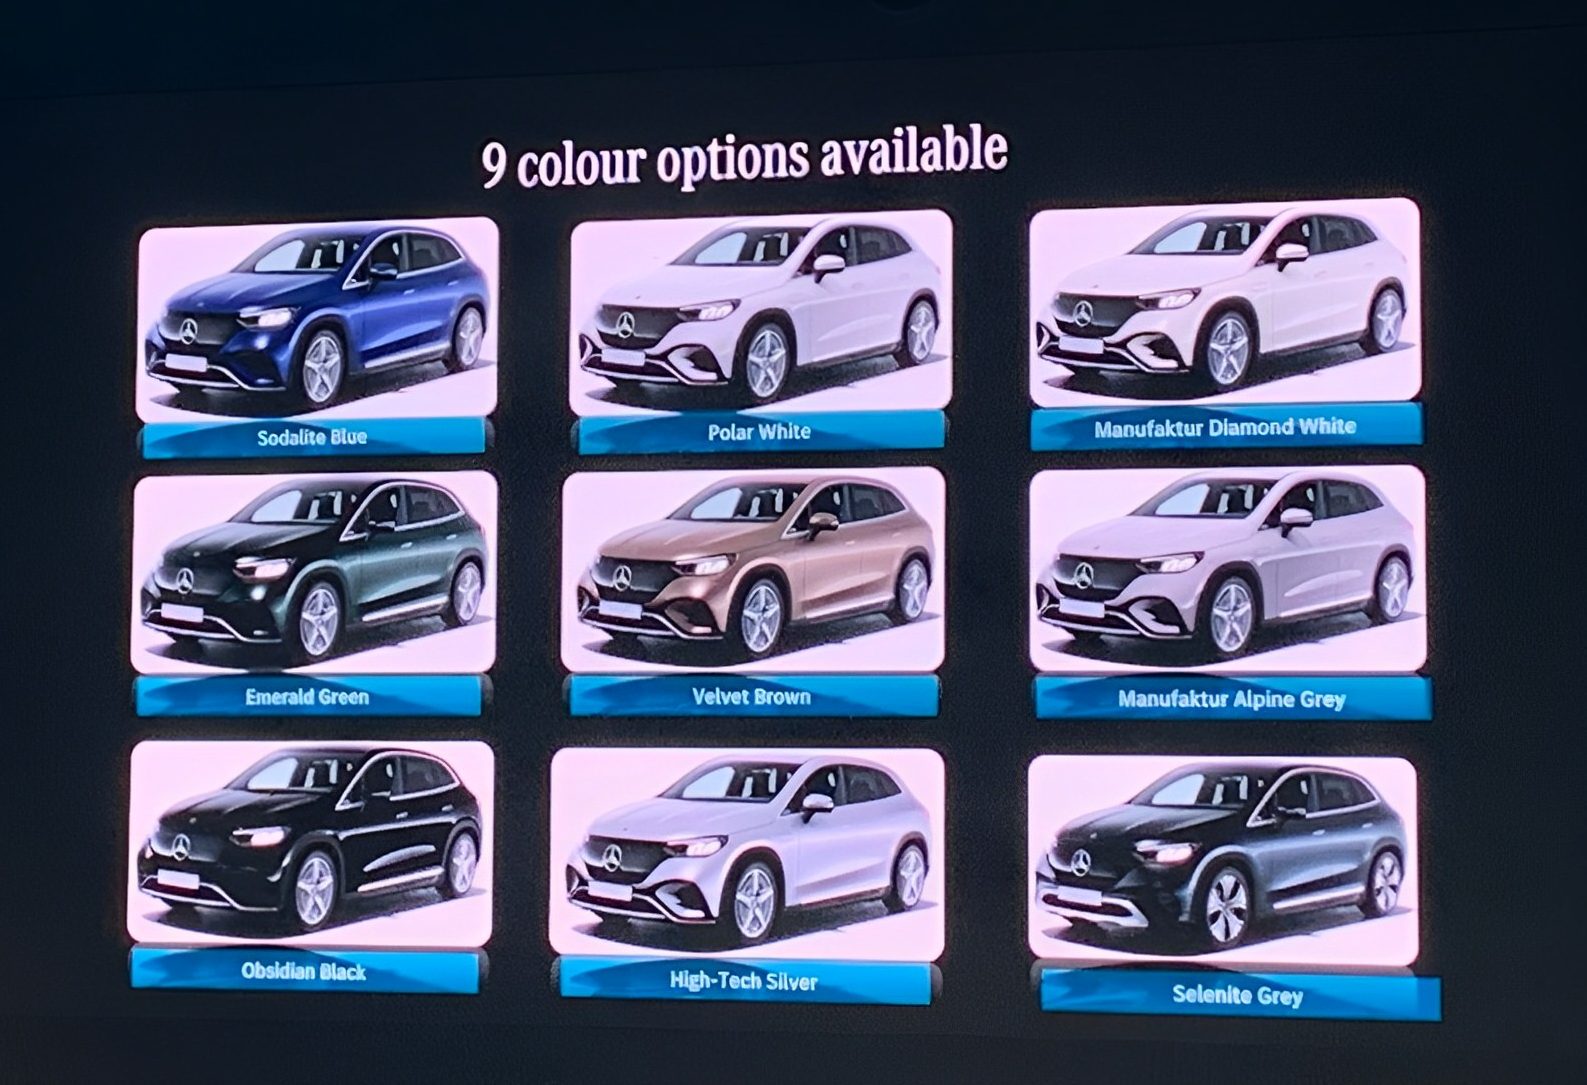 https://e-vehicleinfo.com/mercedes-benz-launched-eqe-electric-suv-in-india/